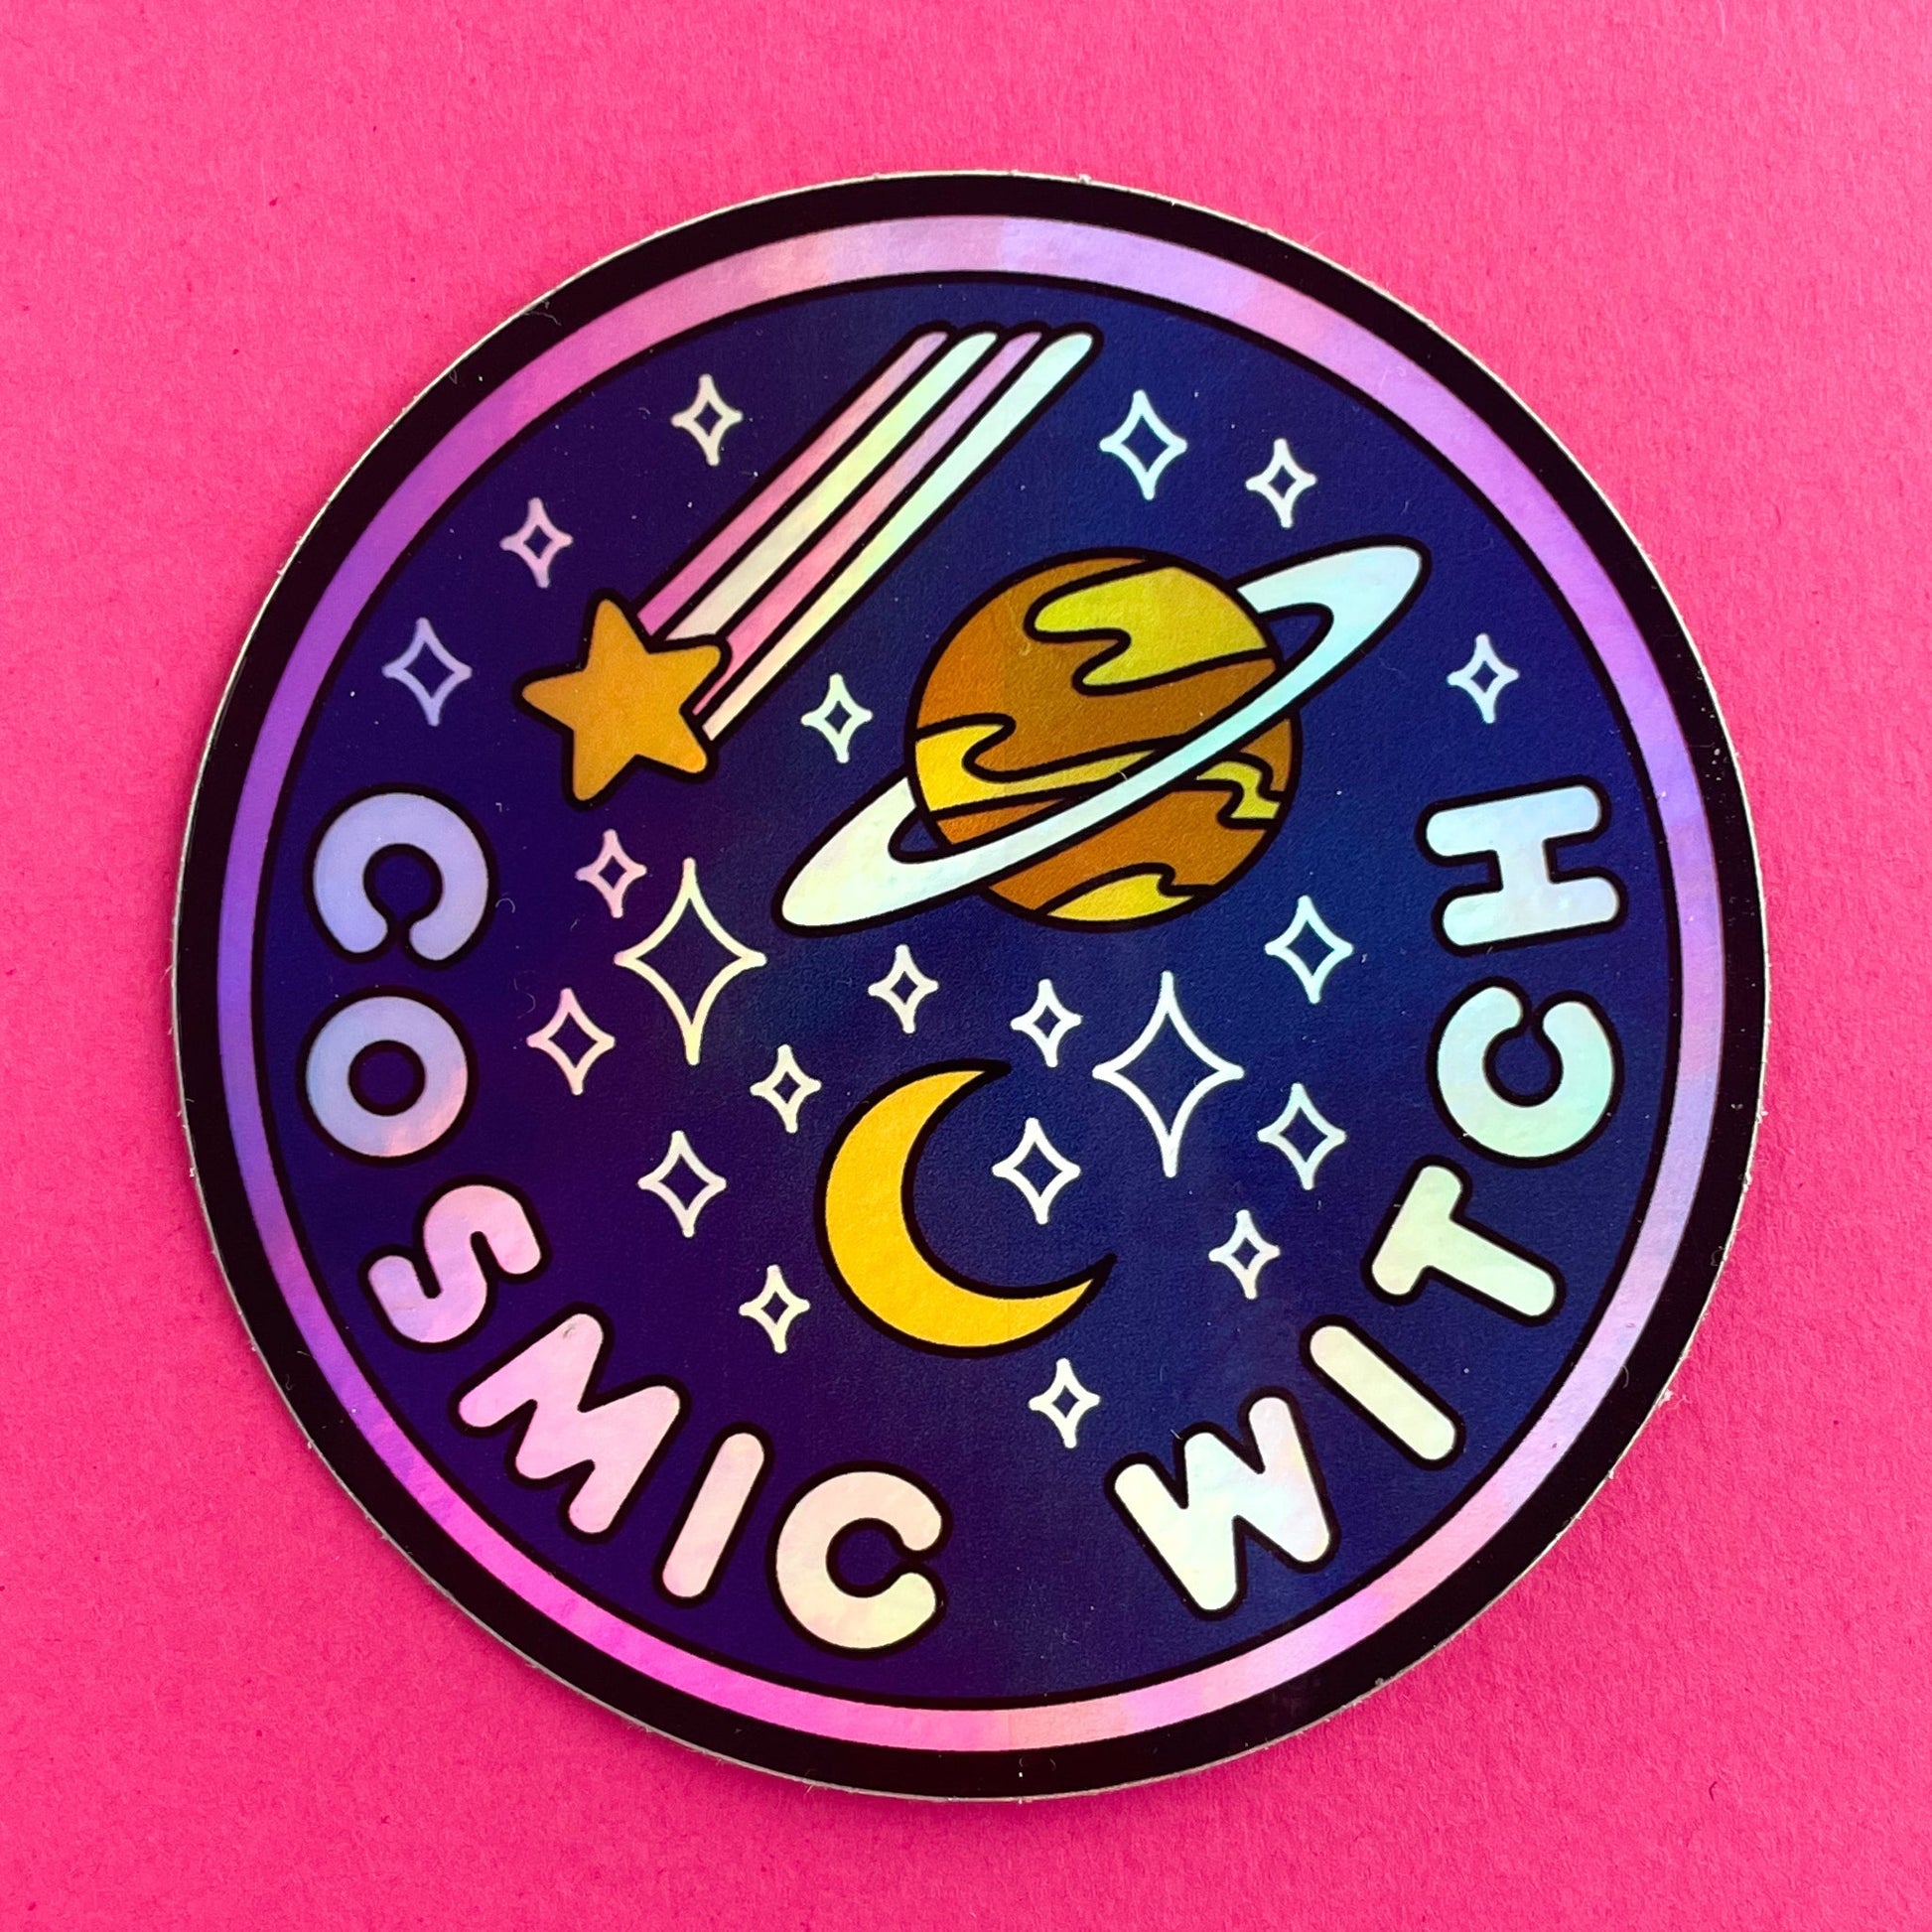 A circular holographic sticker. It has a hot pink border and a dark blue background with light pink words that read "Cosmic Witch". Depicted above the words are a crescent moon, sparkle stars, a shooting star, and the planet Saturn. The sticker is on a hot pink background.